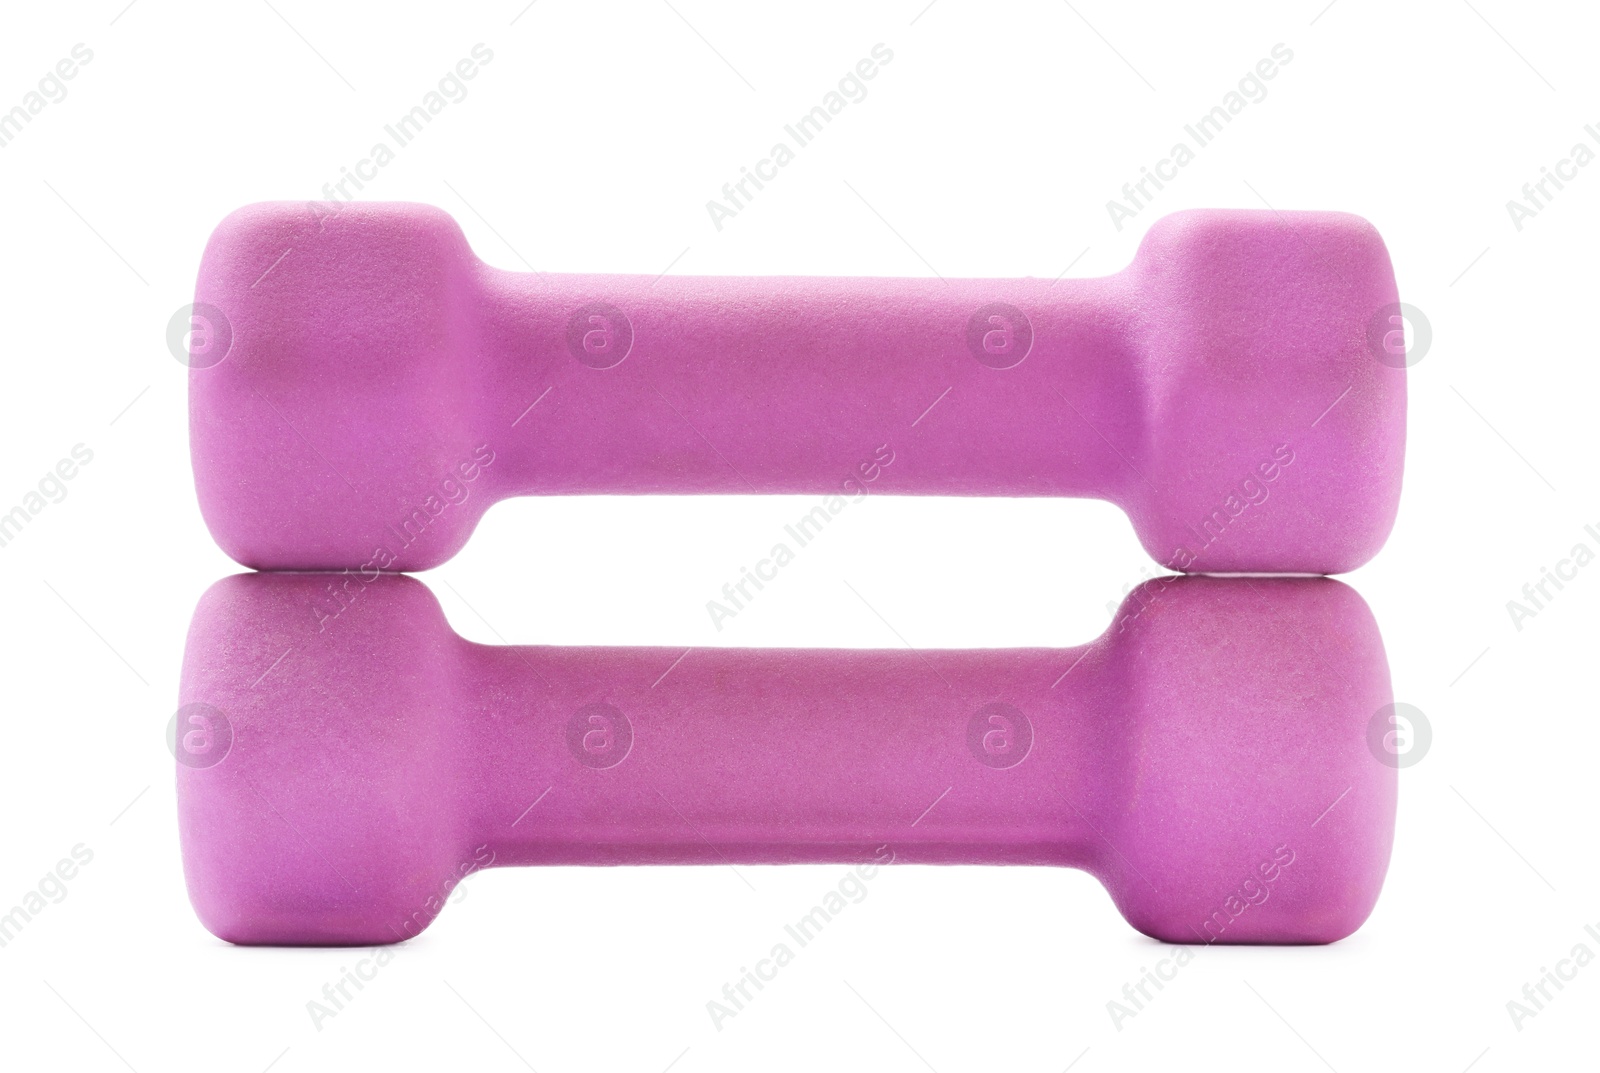 Photo of Violet dumbbells isolated on white. Sports equipment